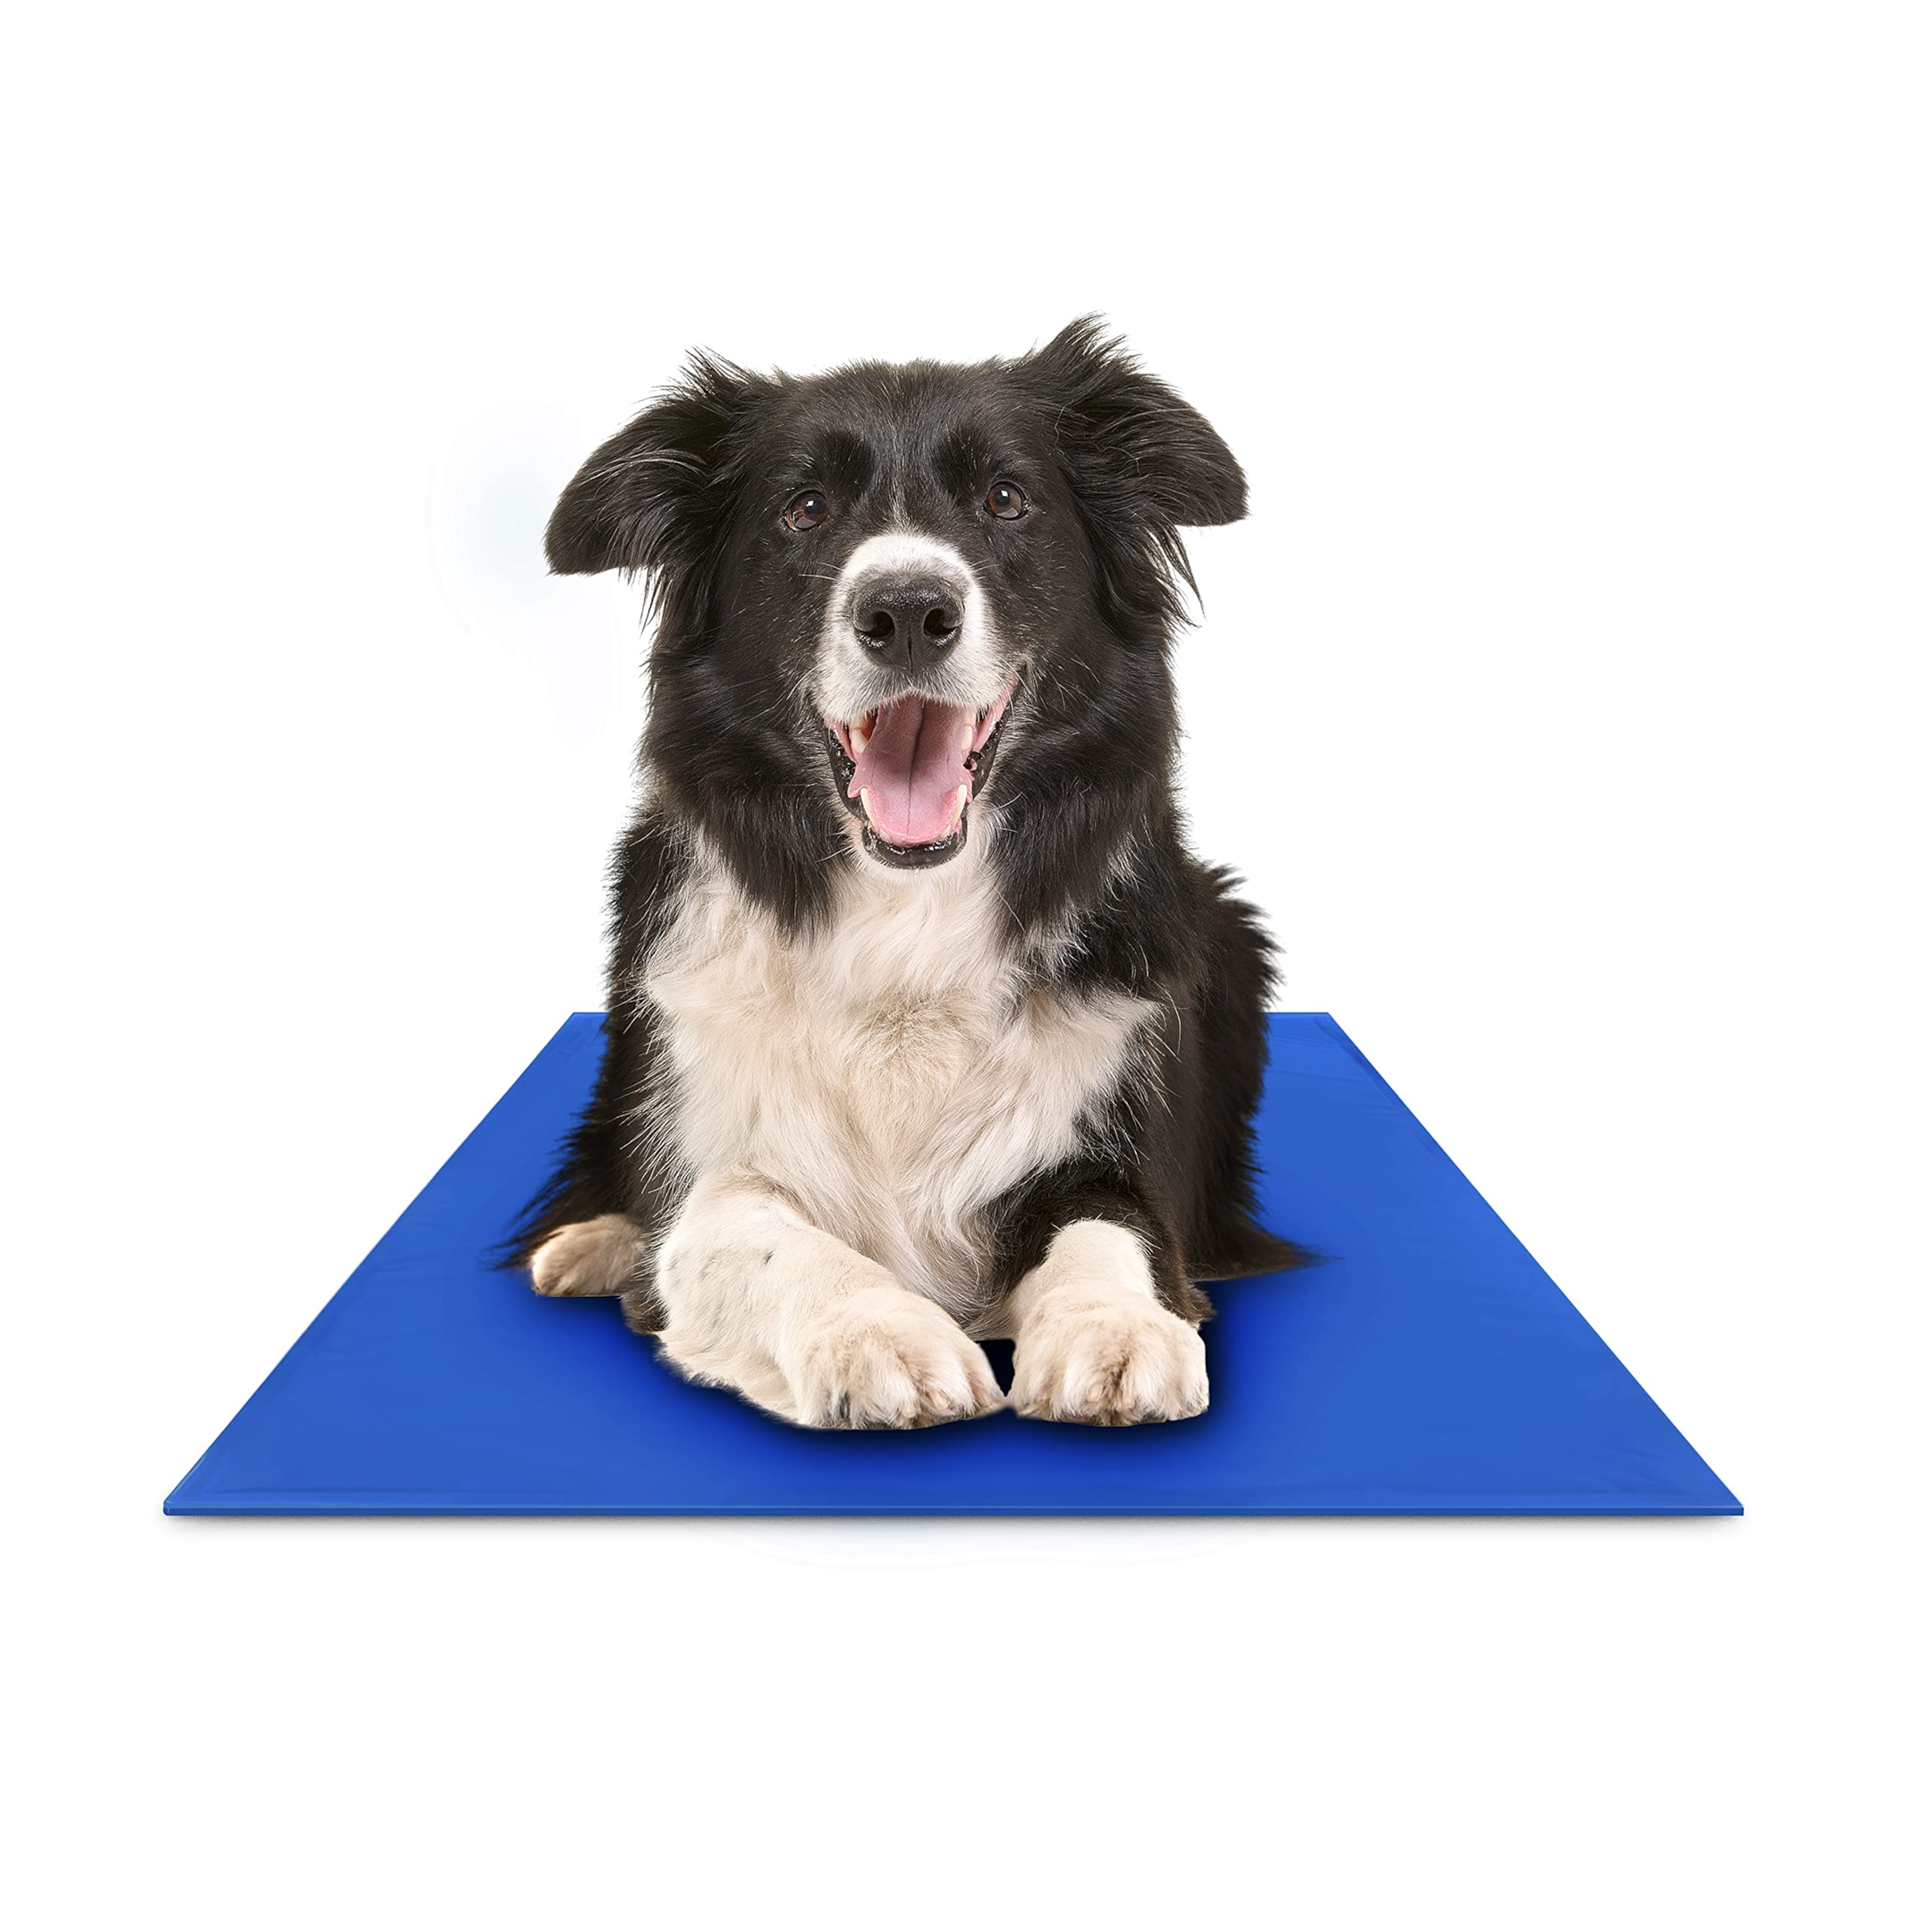 This cooling mat may help your pet chill this summer - Reviewed